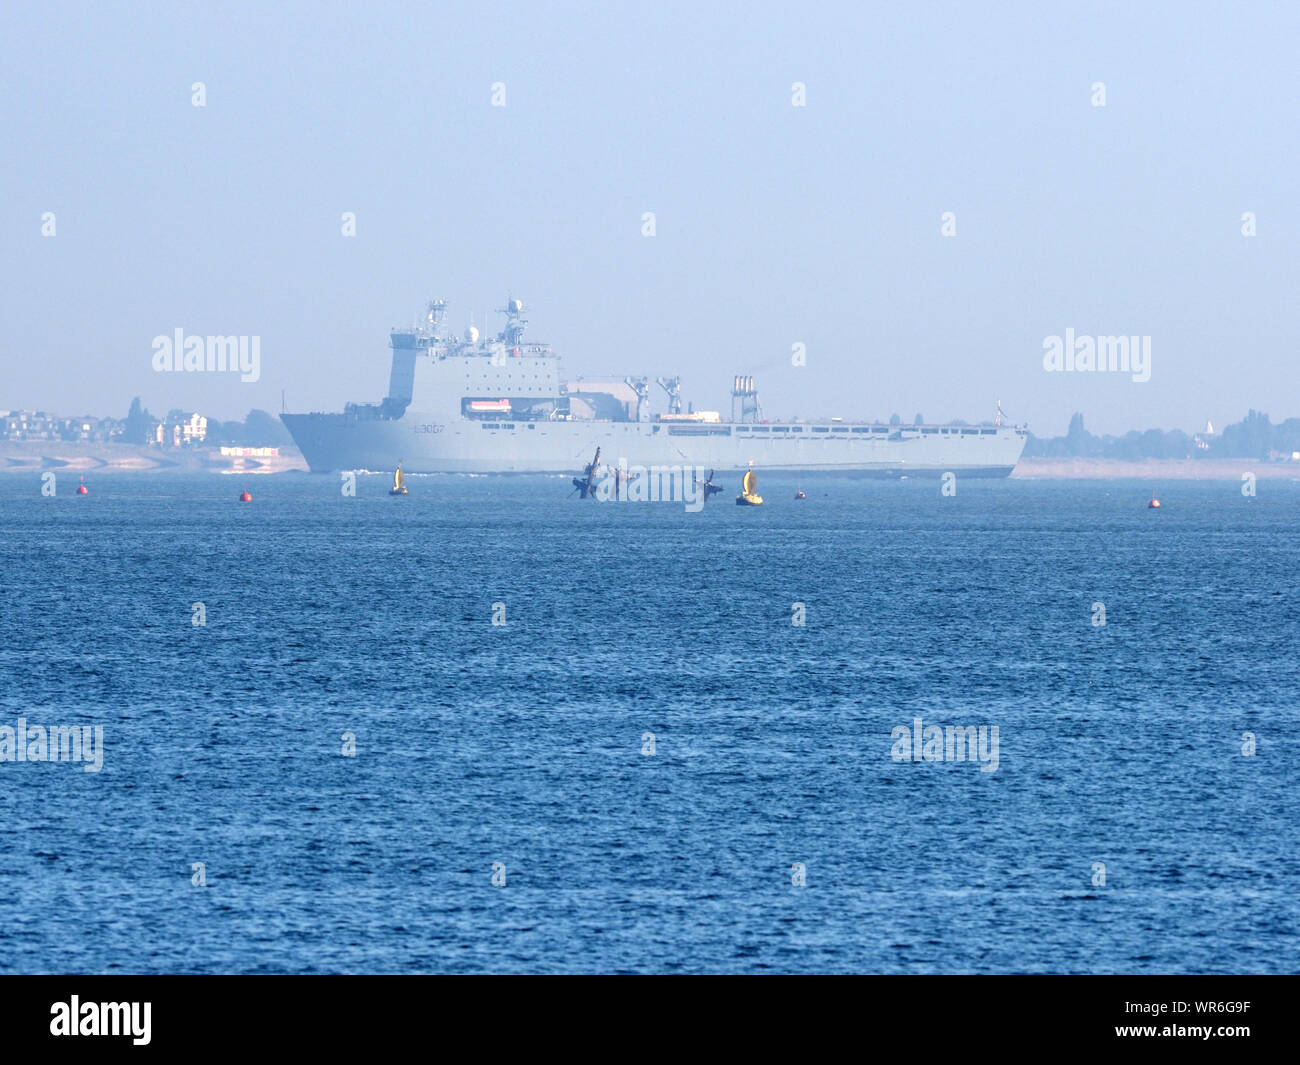 Sheerness, Kent, UK. 10th September, 2019. Royal Fleet Auxiliary ship 'Lyme Bay' seen off of Sheerness, Kent seen this morning in the early morning mist as it departs for London. RFA Lyme Bay is attending London International Shipping Week. The Defense & Security Equipment International (DSEI) Show is also on at Excel. Credit: James Bell/Alamy Live News Stock Photo